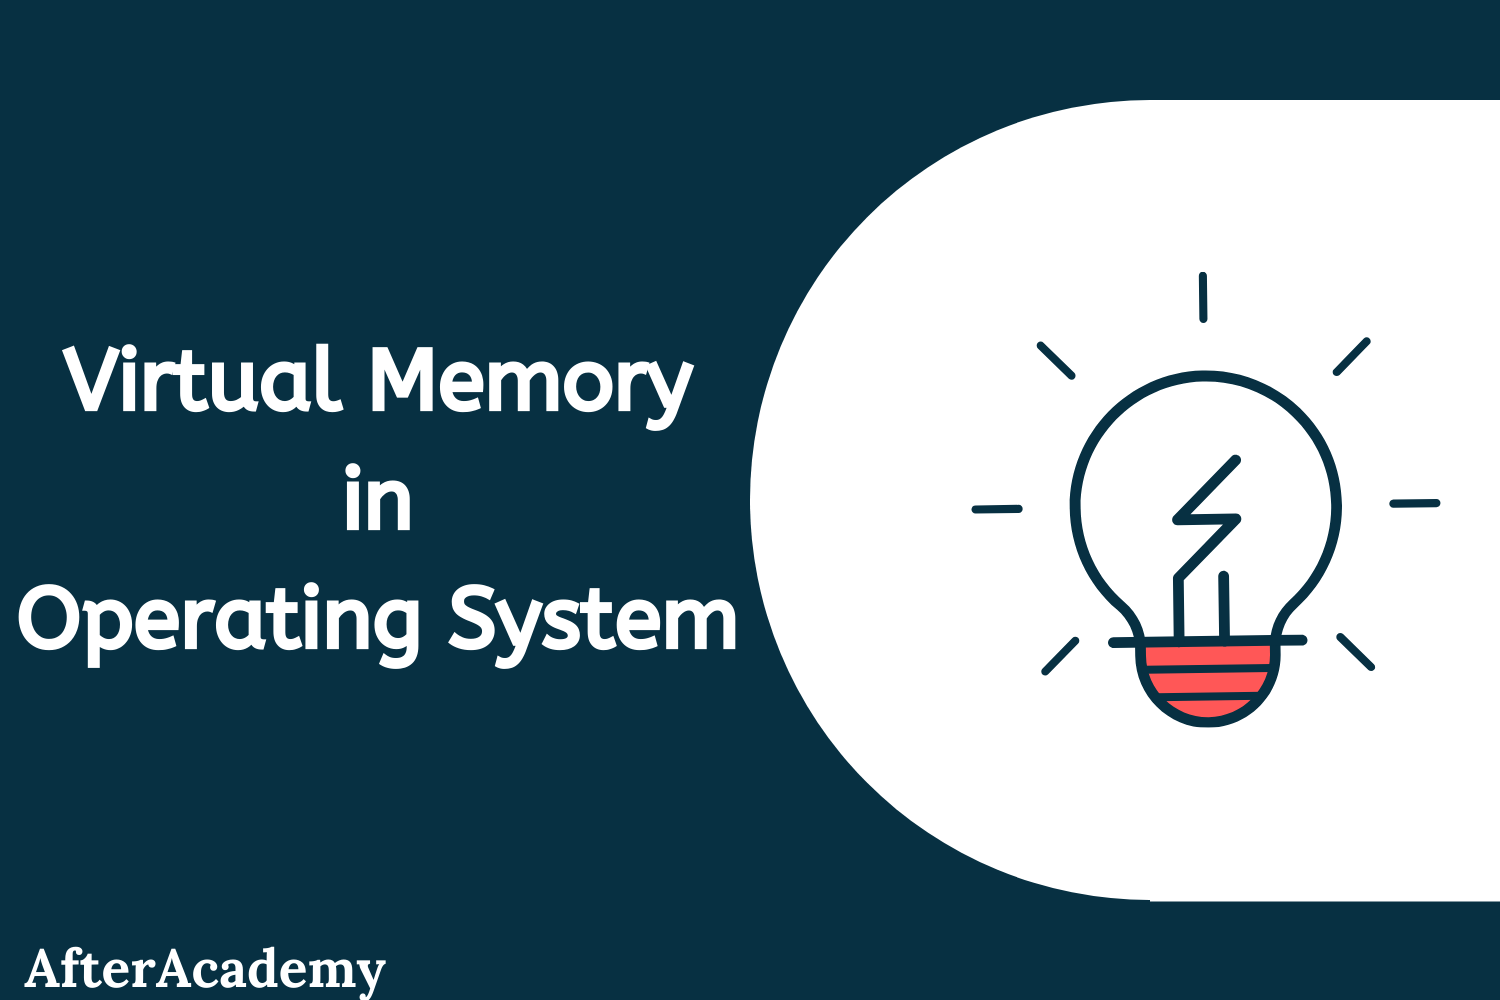 What is Virtual Memory and how is it implemented?